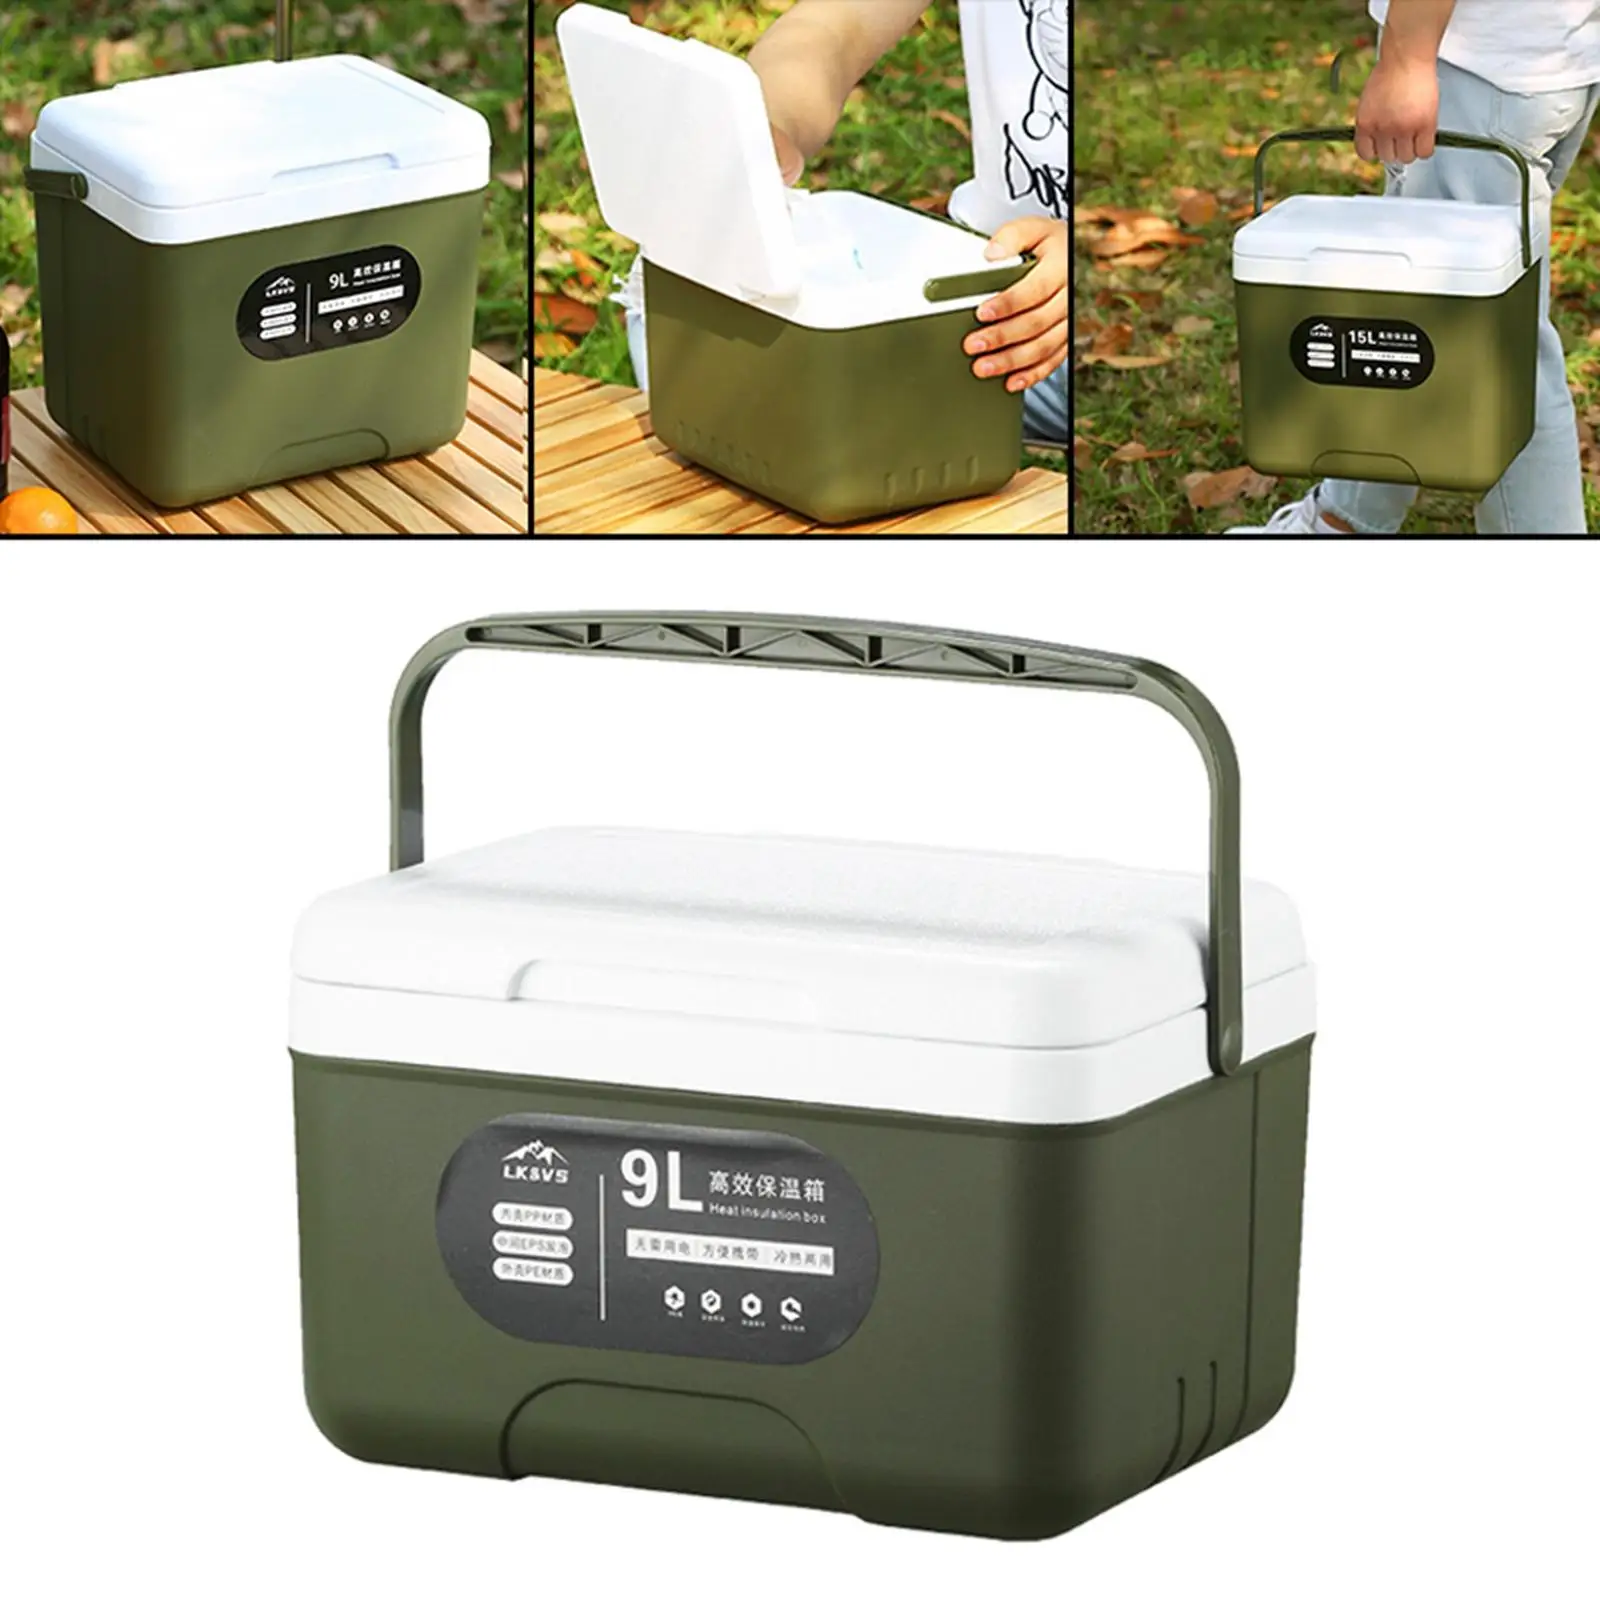 Portable Cooler Bag Fridge 9L Insulated Thermal Box for Car Boating Trucking